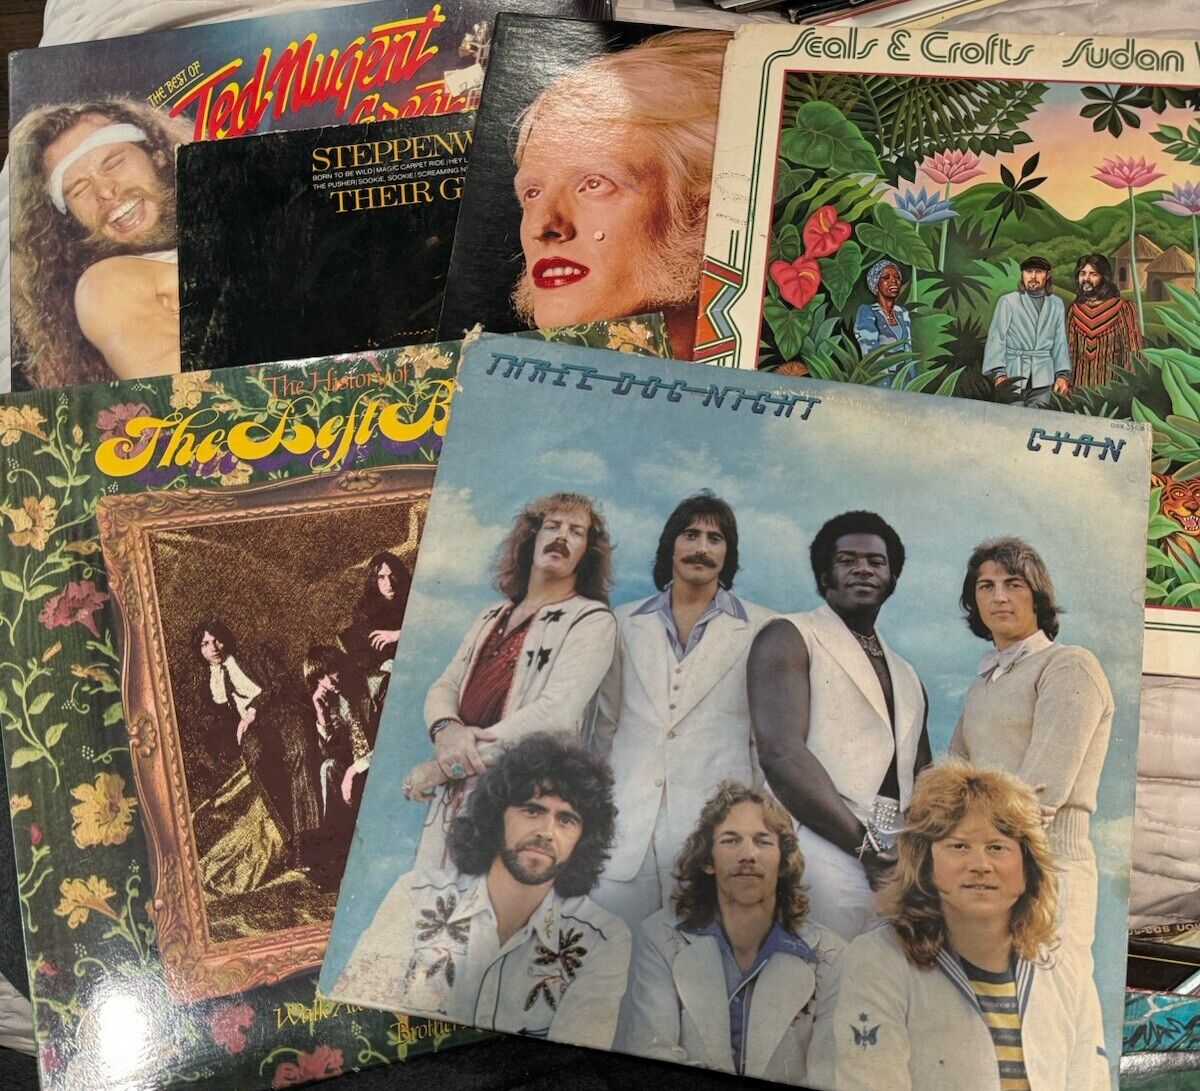 Lot 6 VINYL RECORDS 70s Classic ROCK LPS USED RECORD ALBUMS.